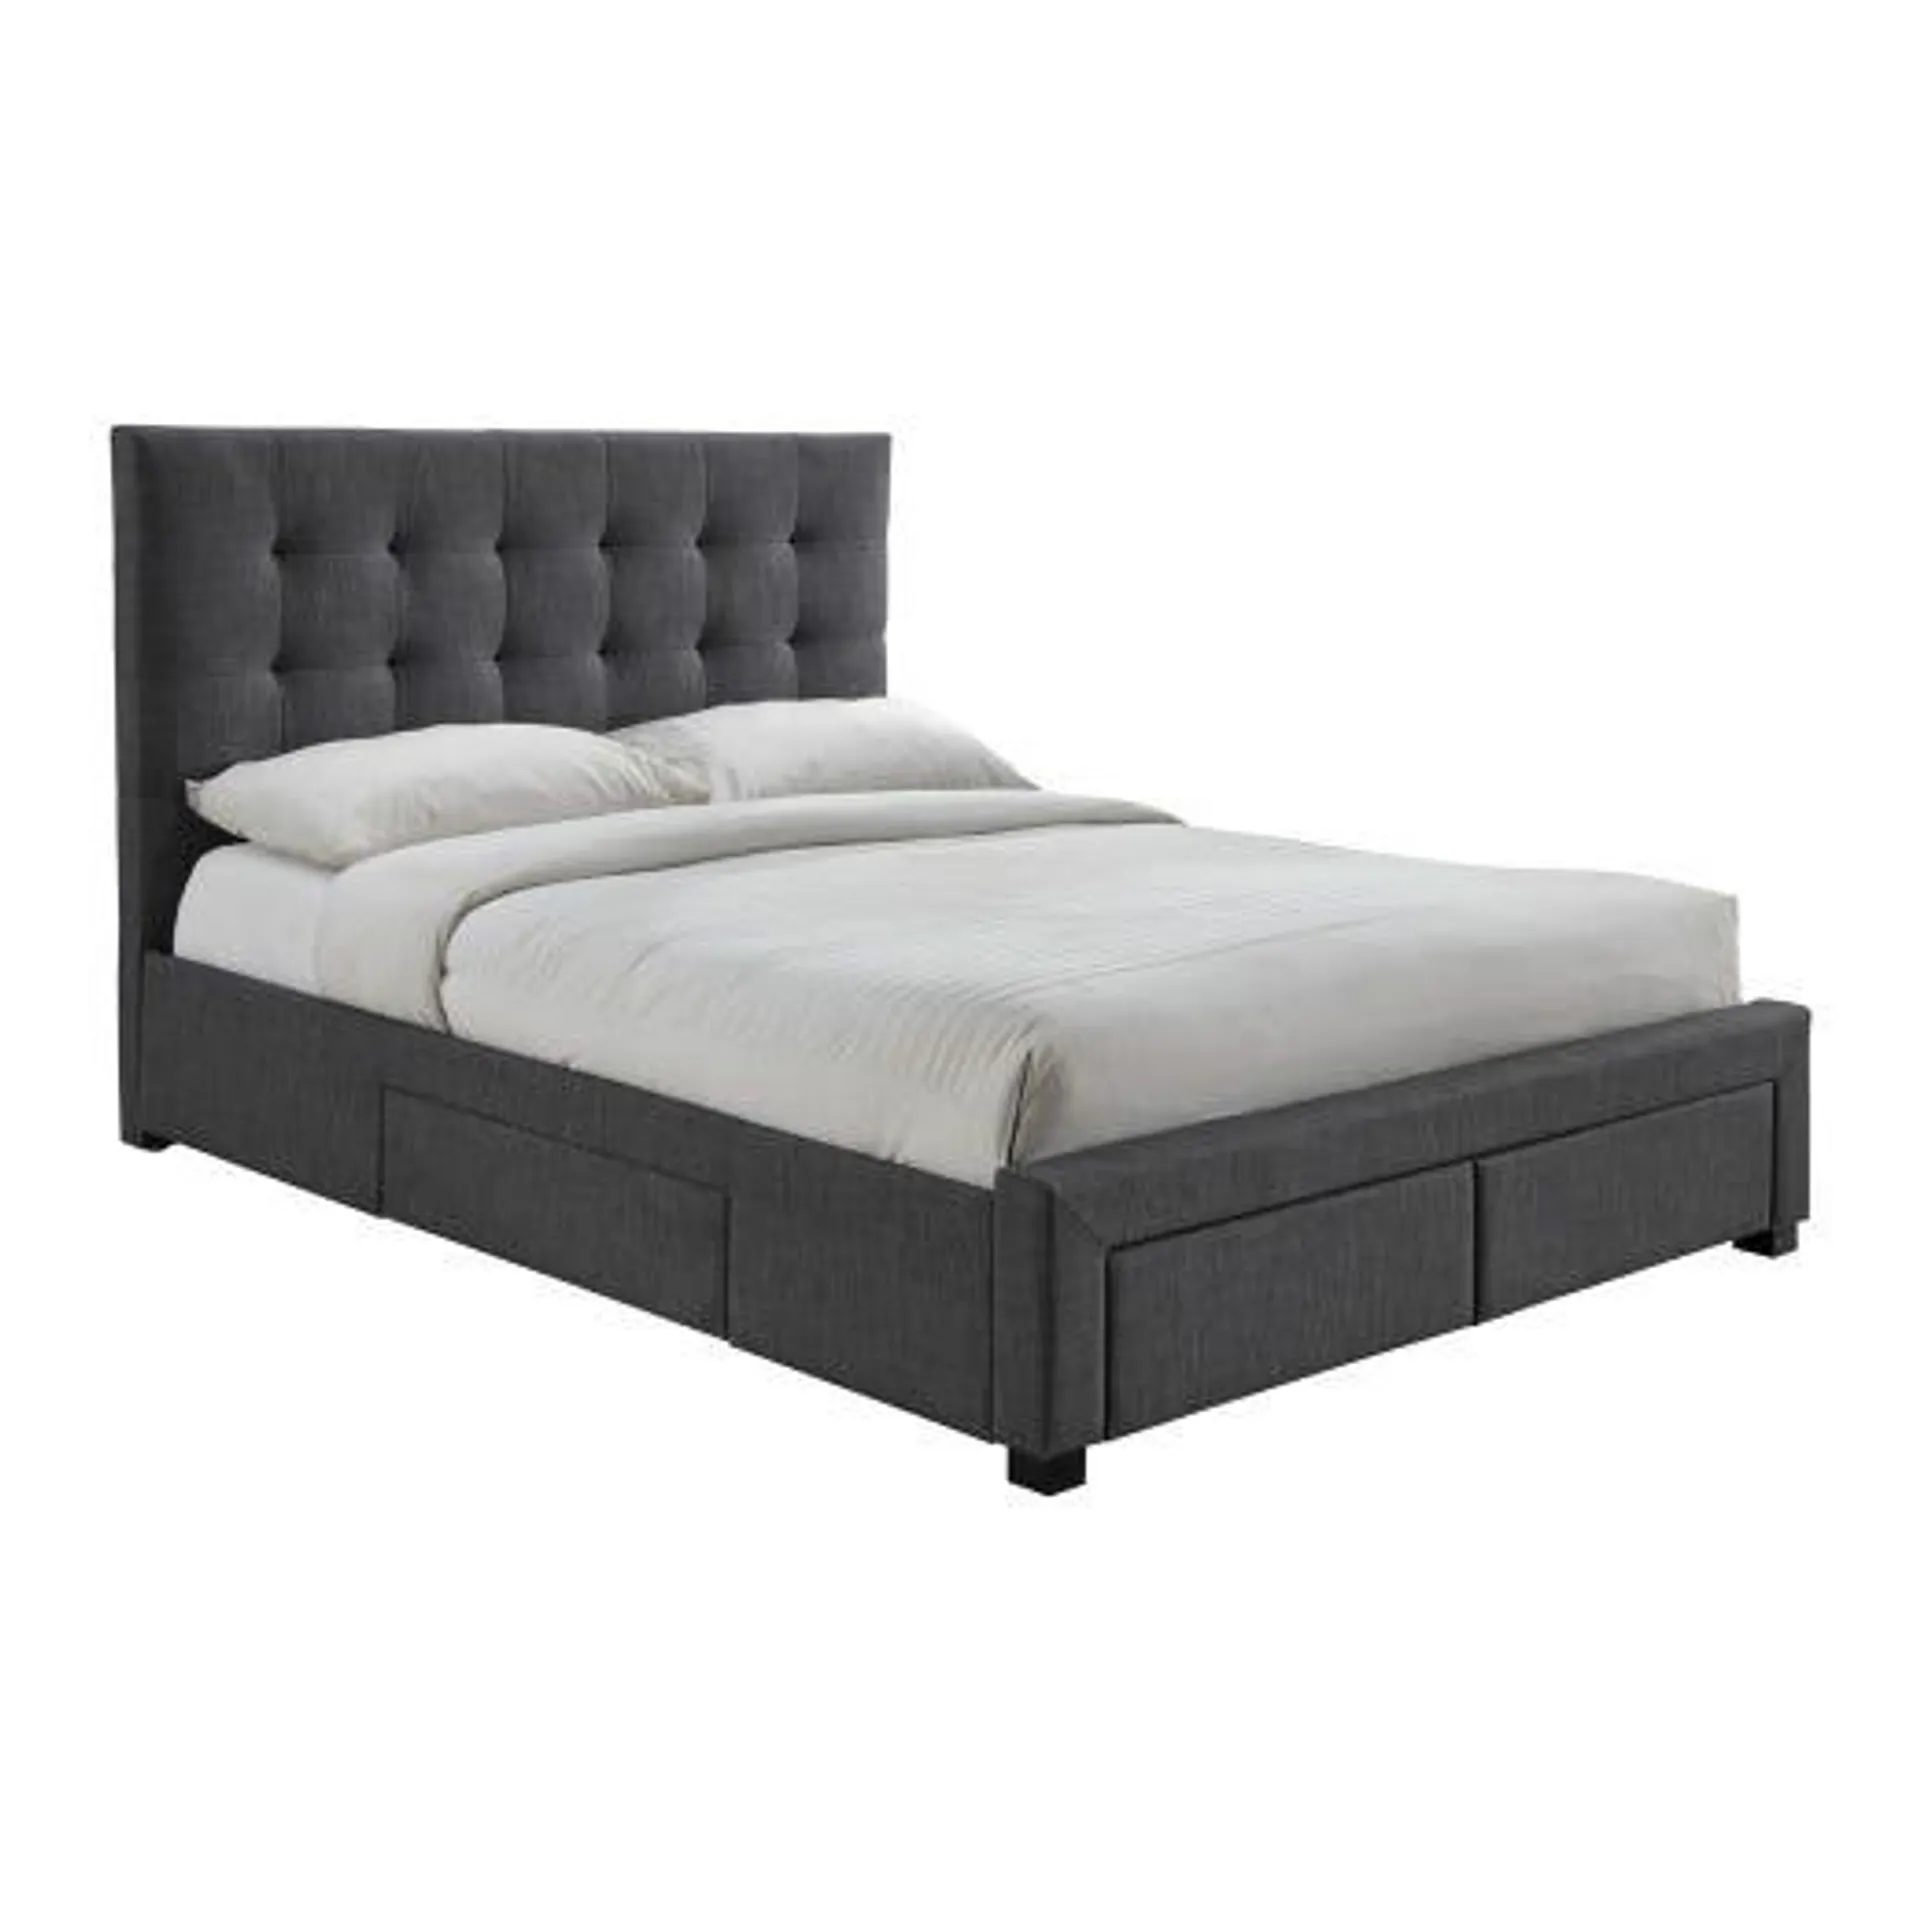 Bed Frame With Storage (Queen)